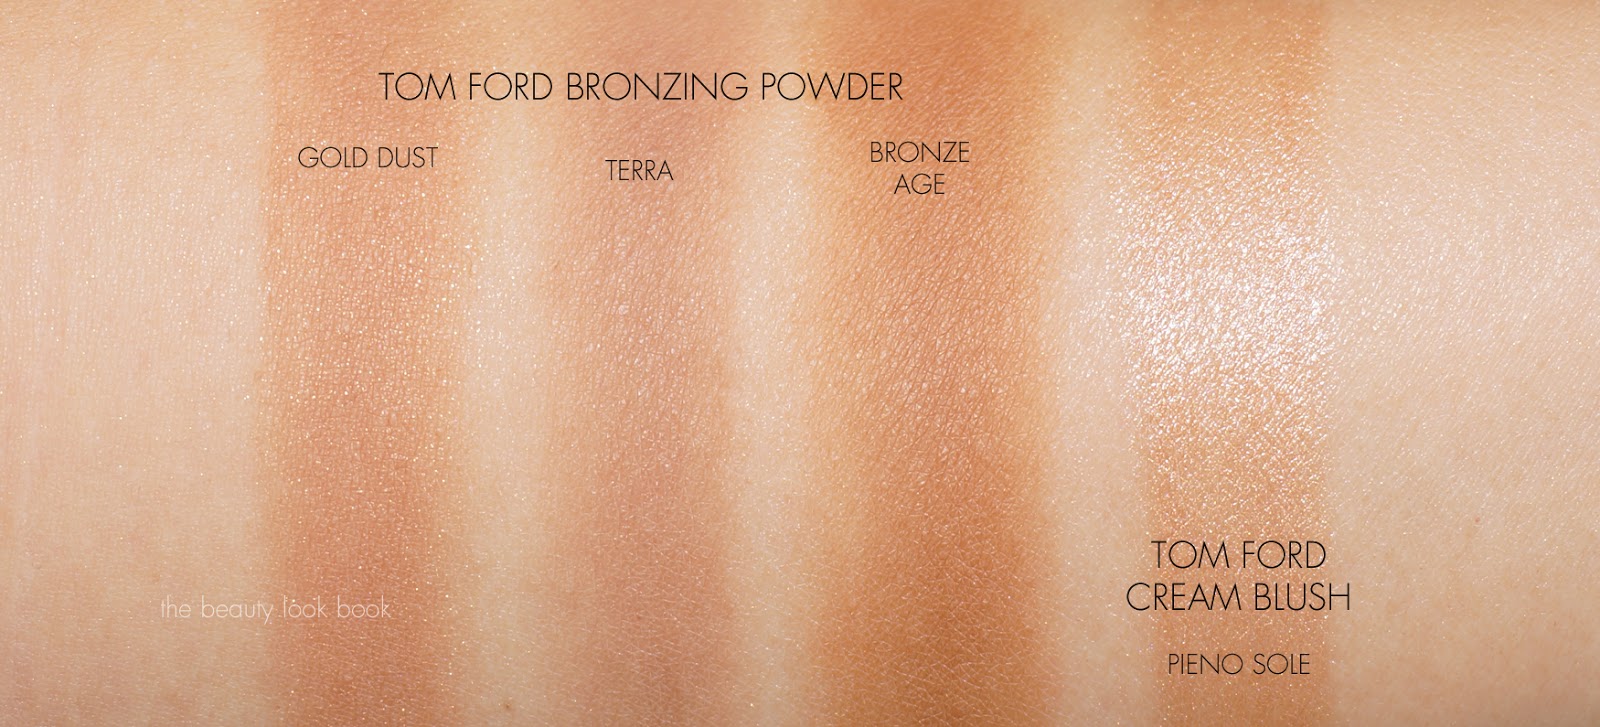 Tom Ford Soleil Collection - Terra and Bronze Age Bronzing Powders and Pieno Sole Cream Cheek - The Beauty Look